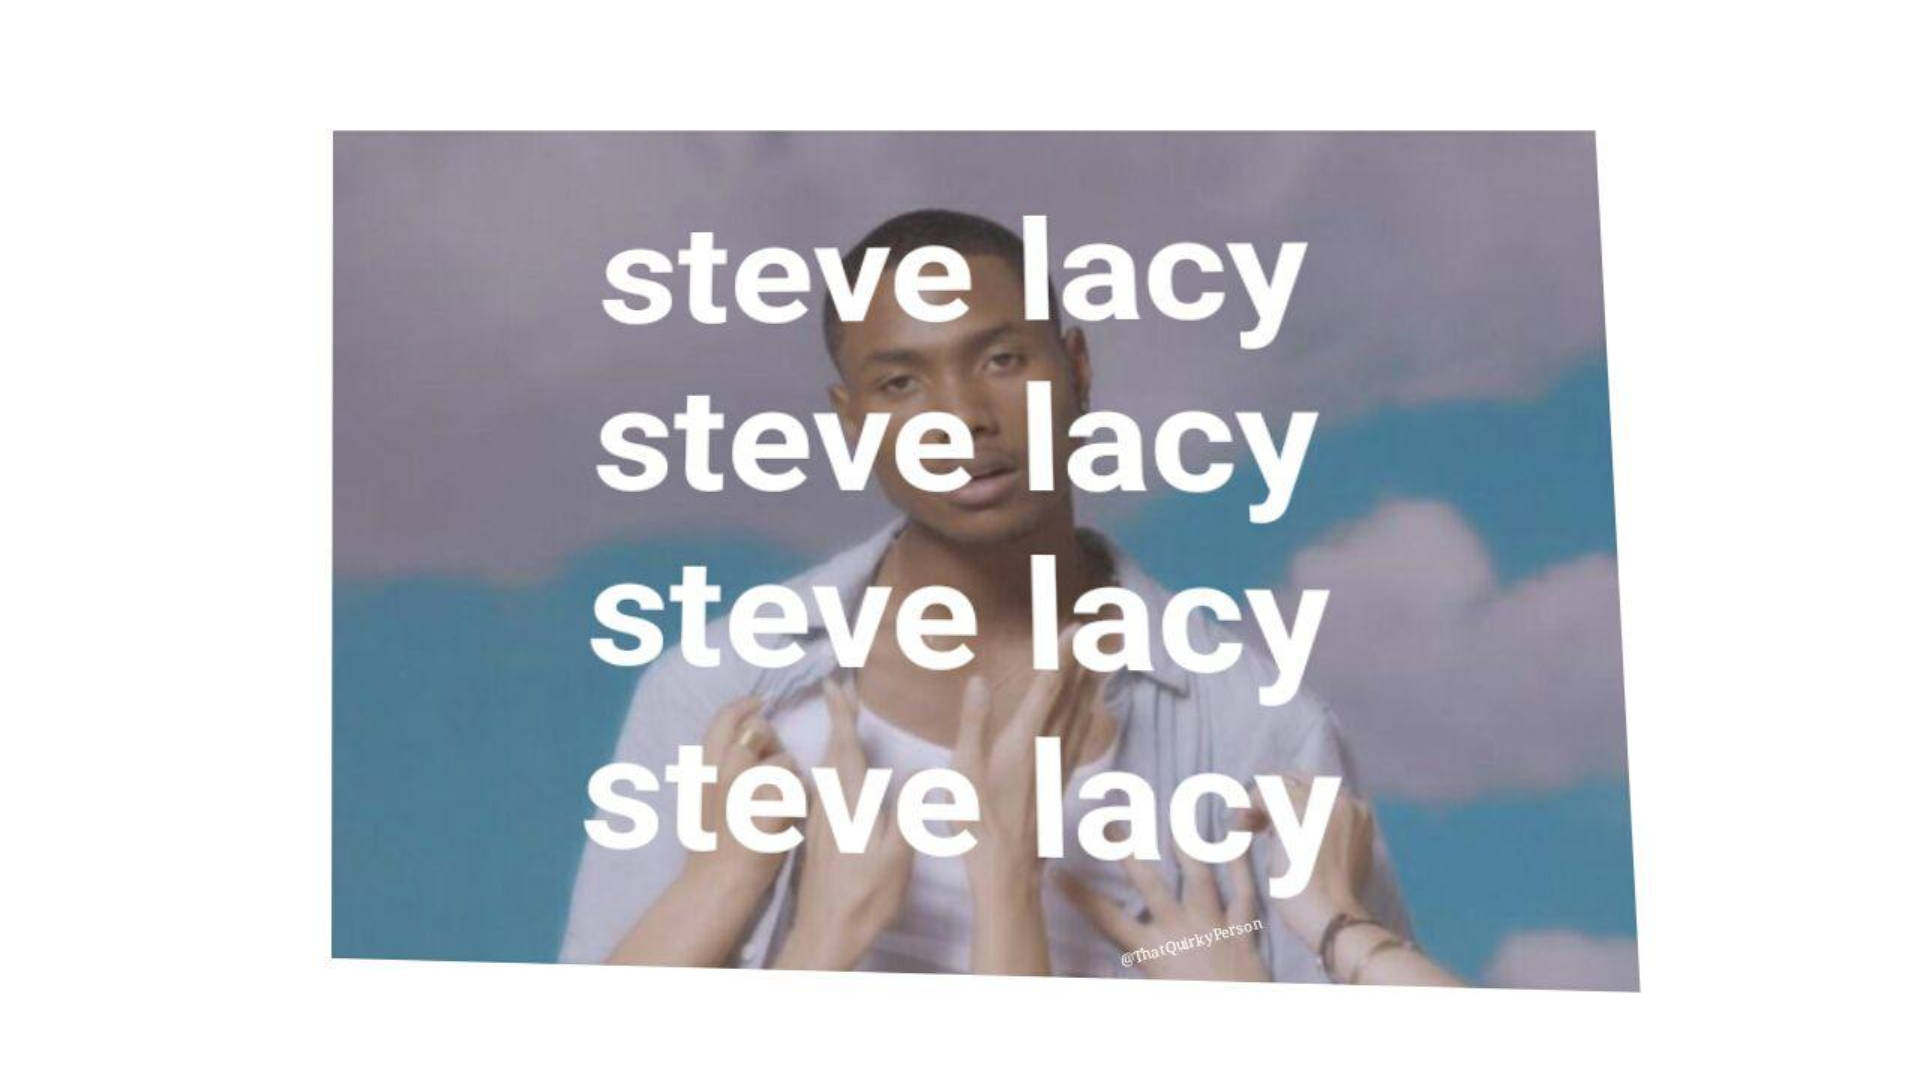 Steve Lacy With Clouds Behind Him